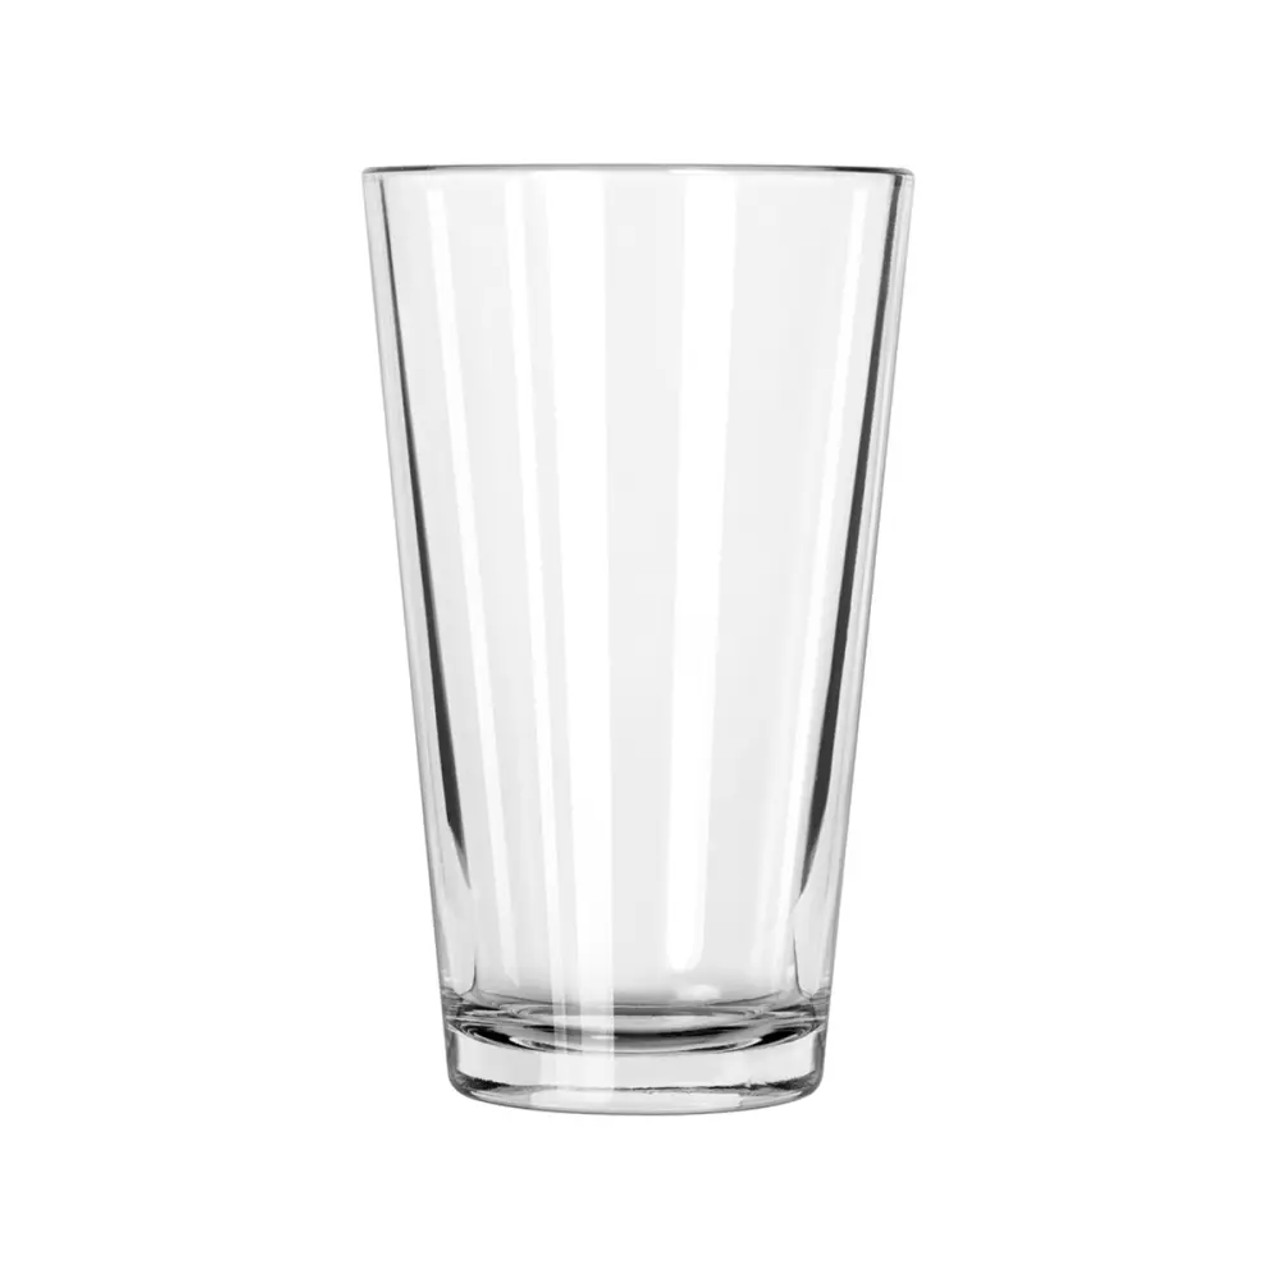 Libbey 5139 16 oz Restaurant Basics Mixing Glass -  Strengthened, (24/Case) - Chicken Pieces